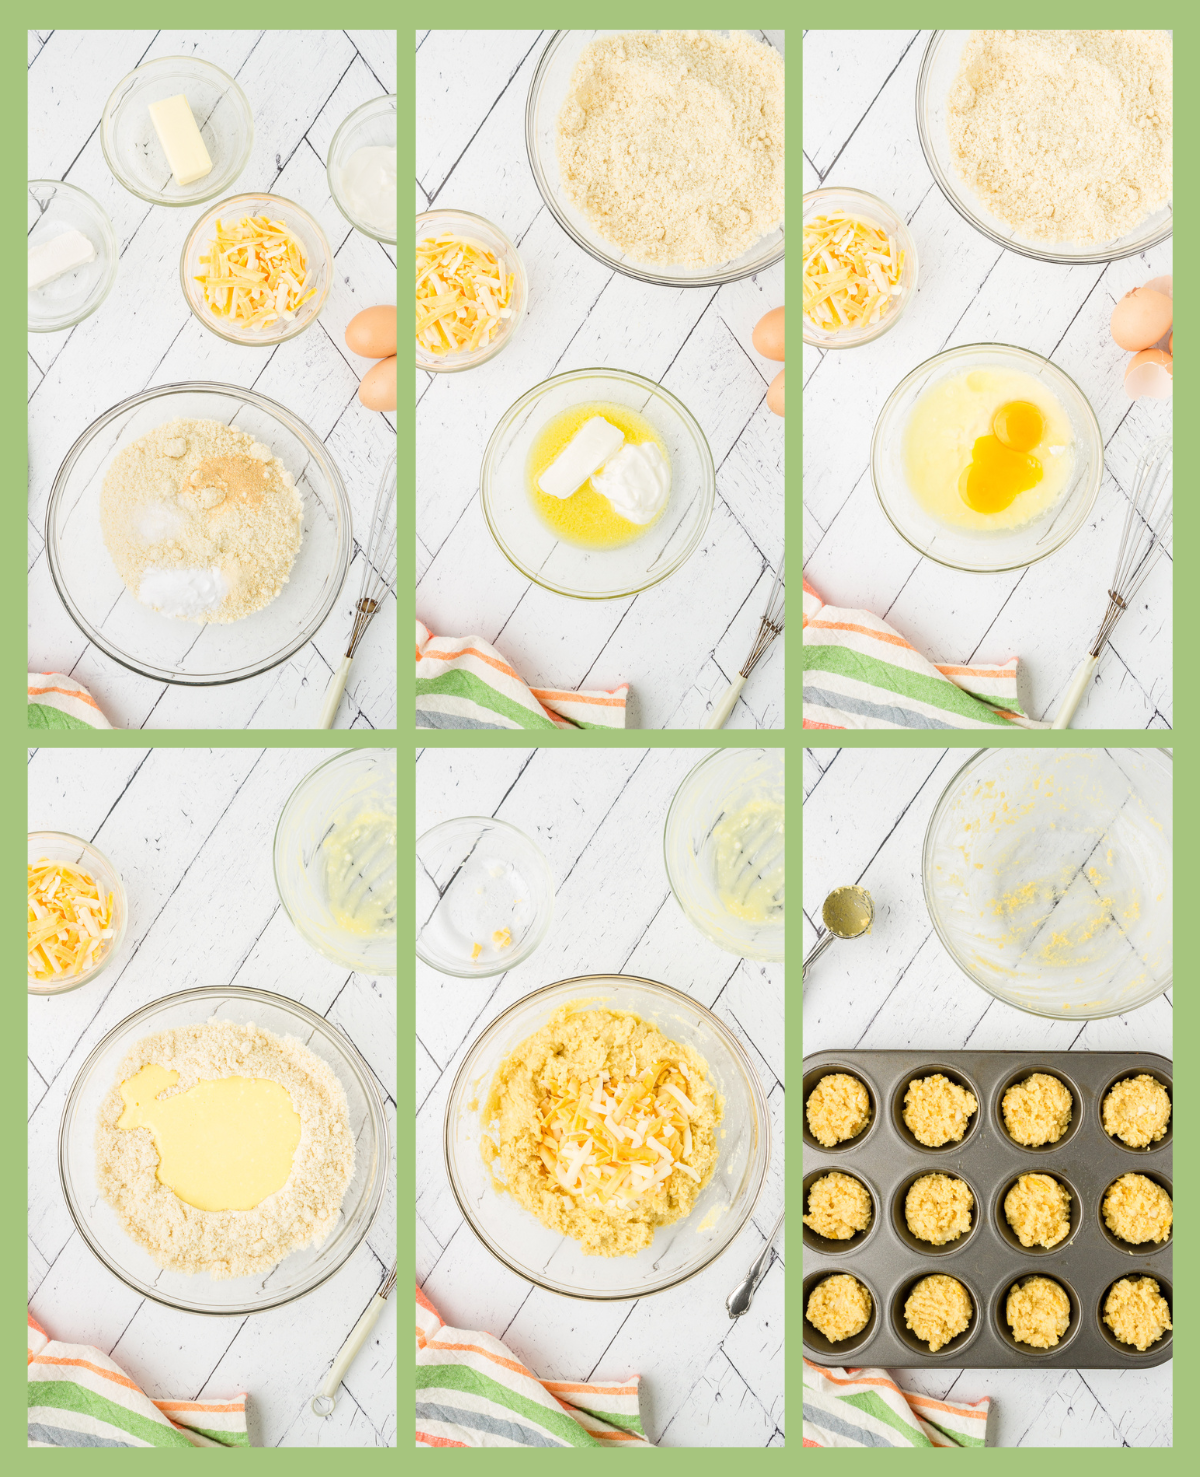 step by step process shots for making keto cheddar biscuits